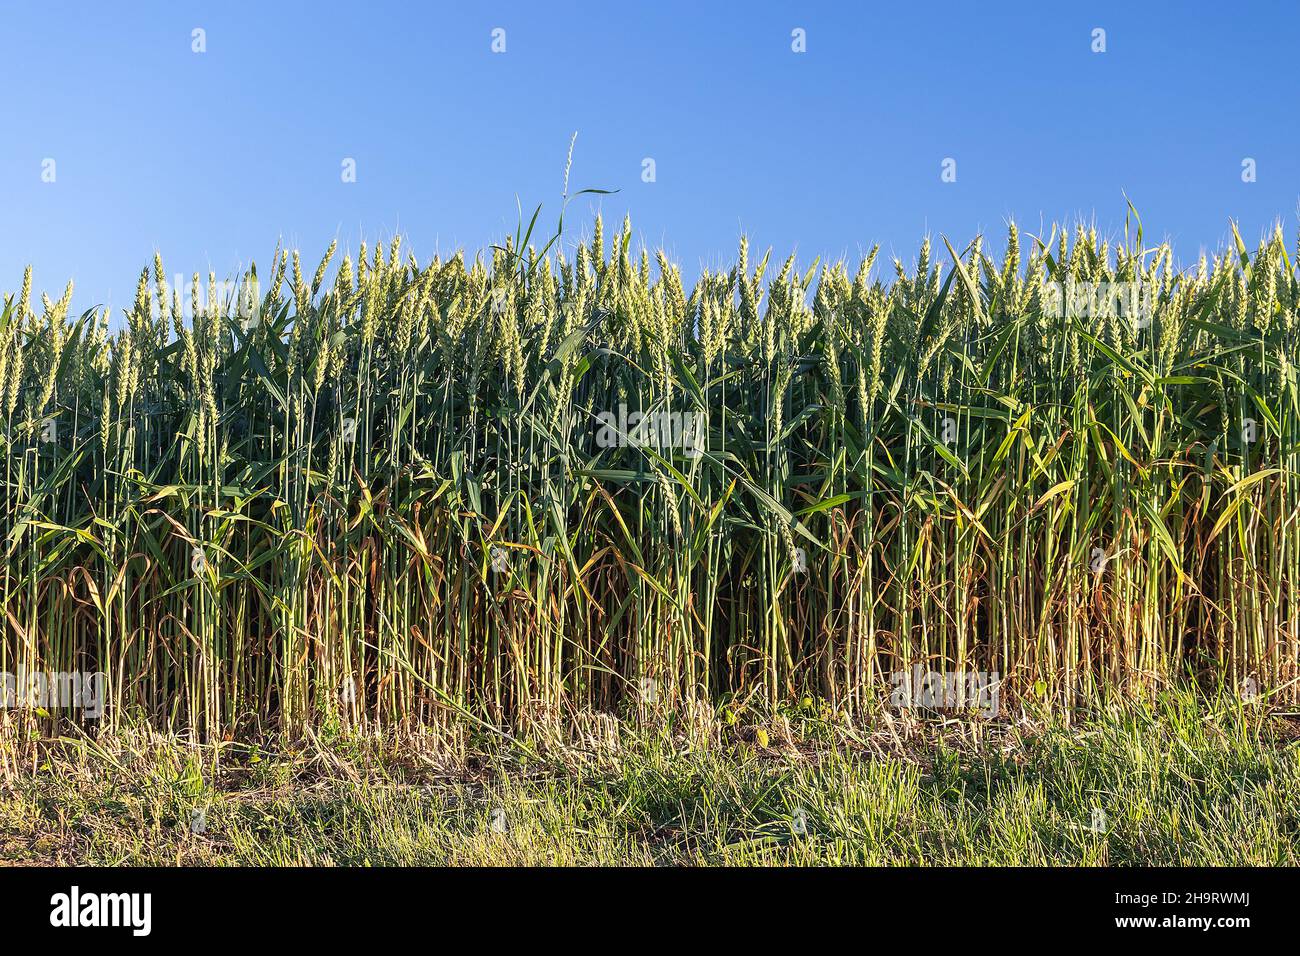 grain field - rural landscape, side view of the whole plant of wheat field Stock Photo